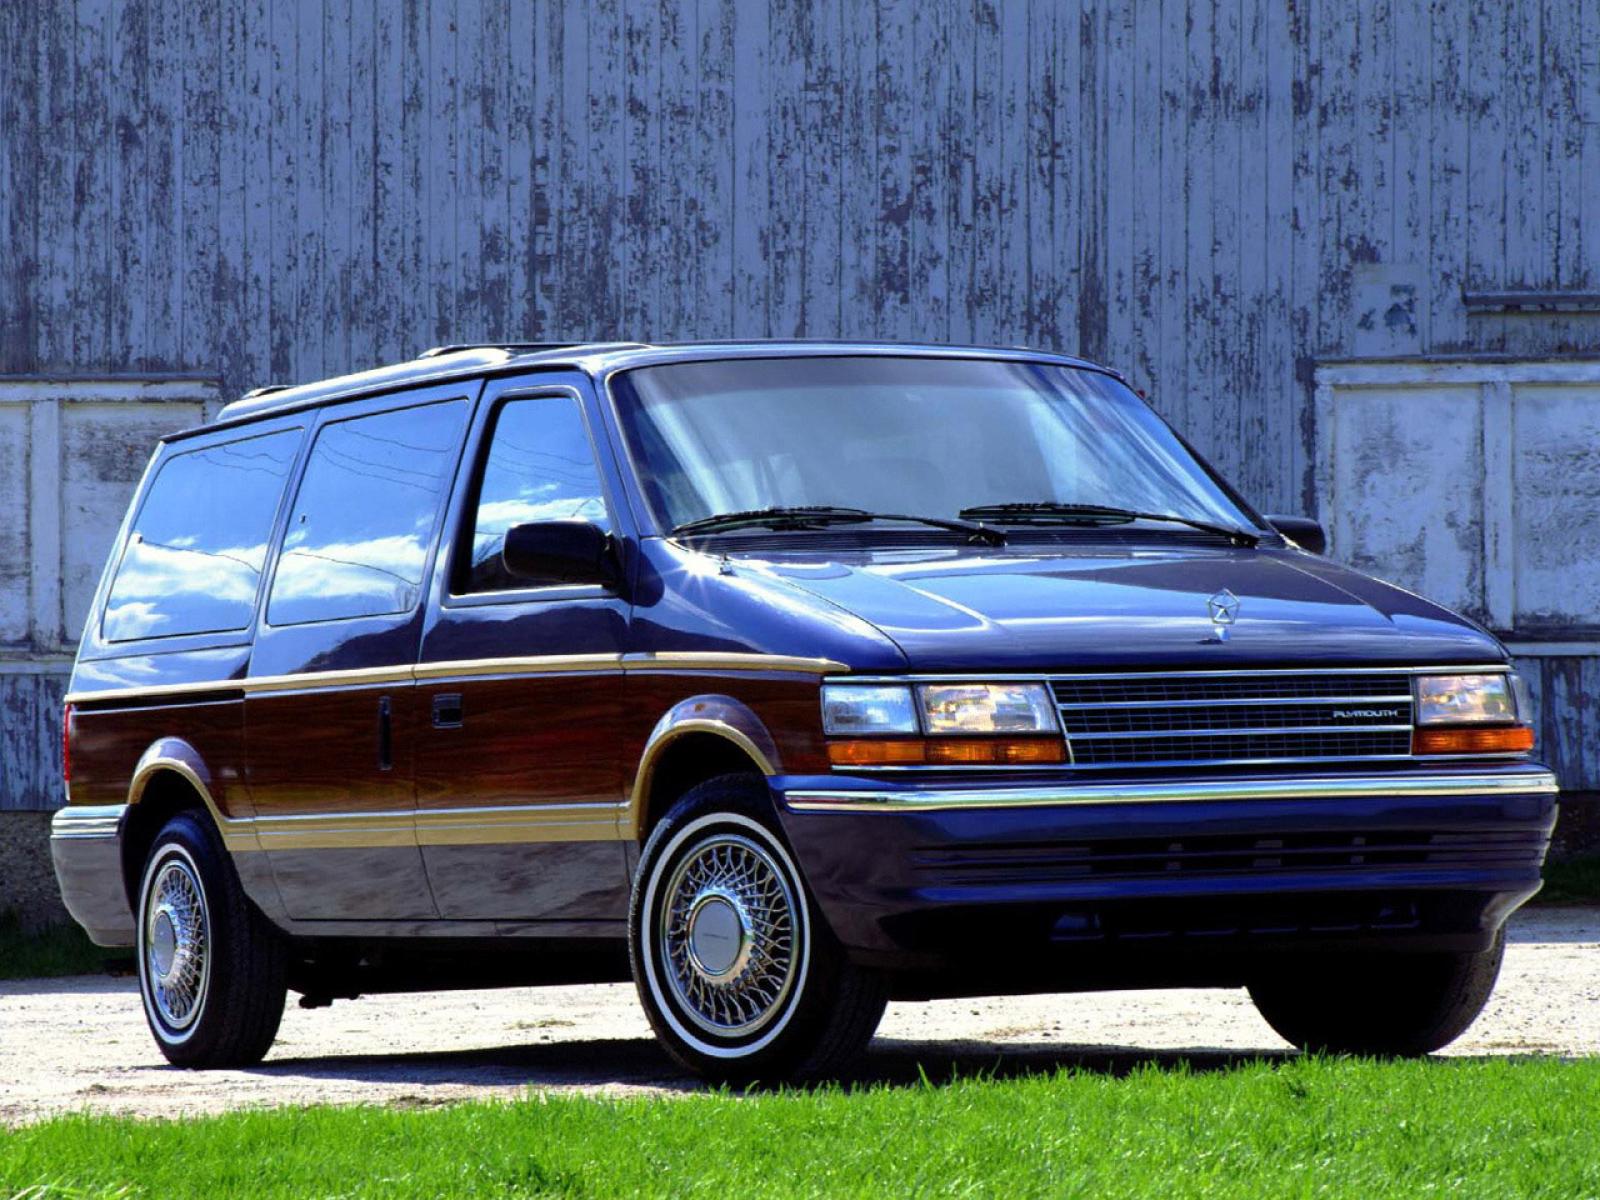 Додж вояджер. Плимут Вояджер 1995. Плимут Гранд Вояджер. Chrysler Plymouth Voyager. Plymouth Voyager 1995.